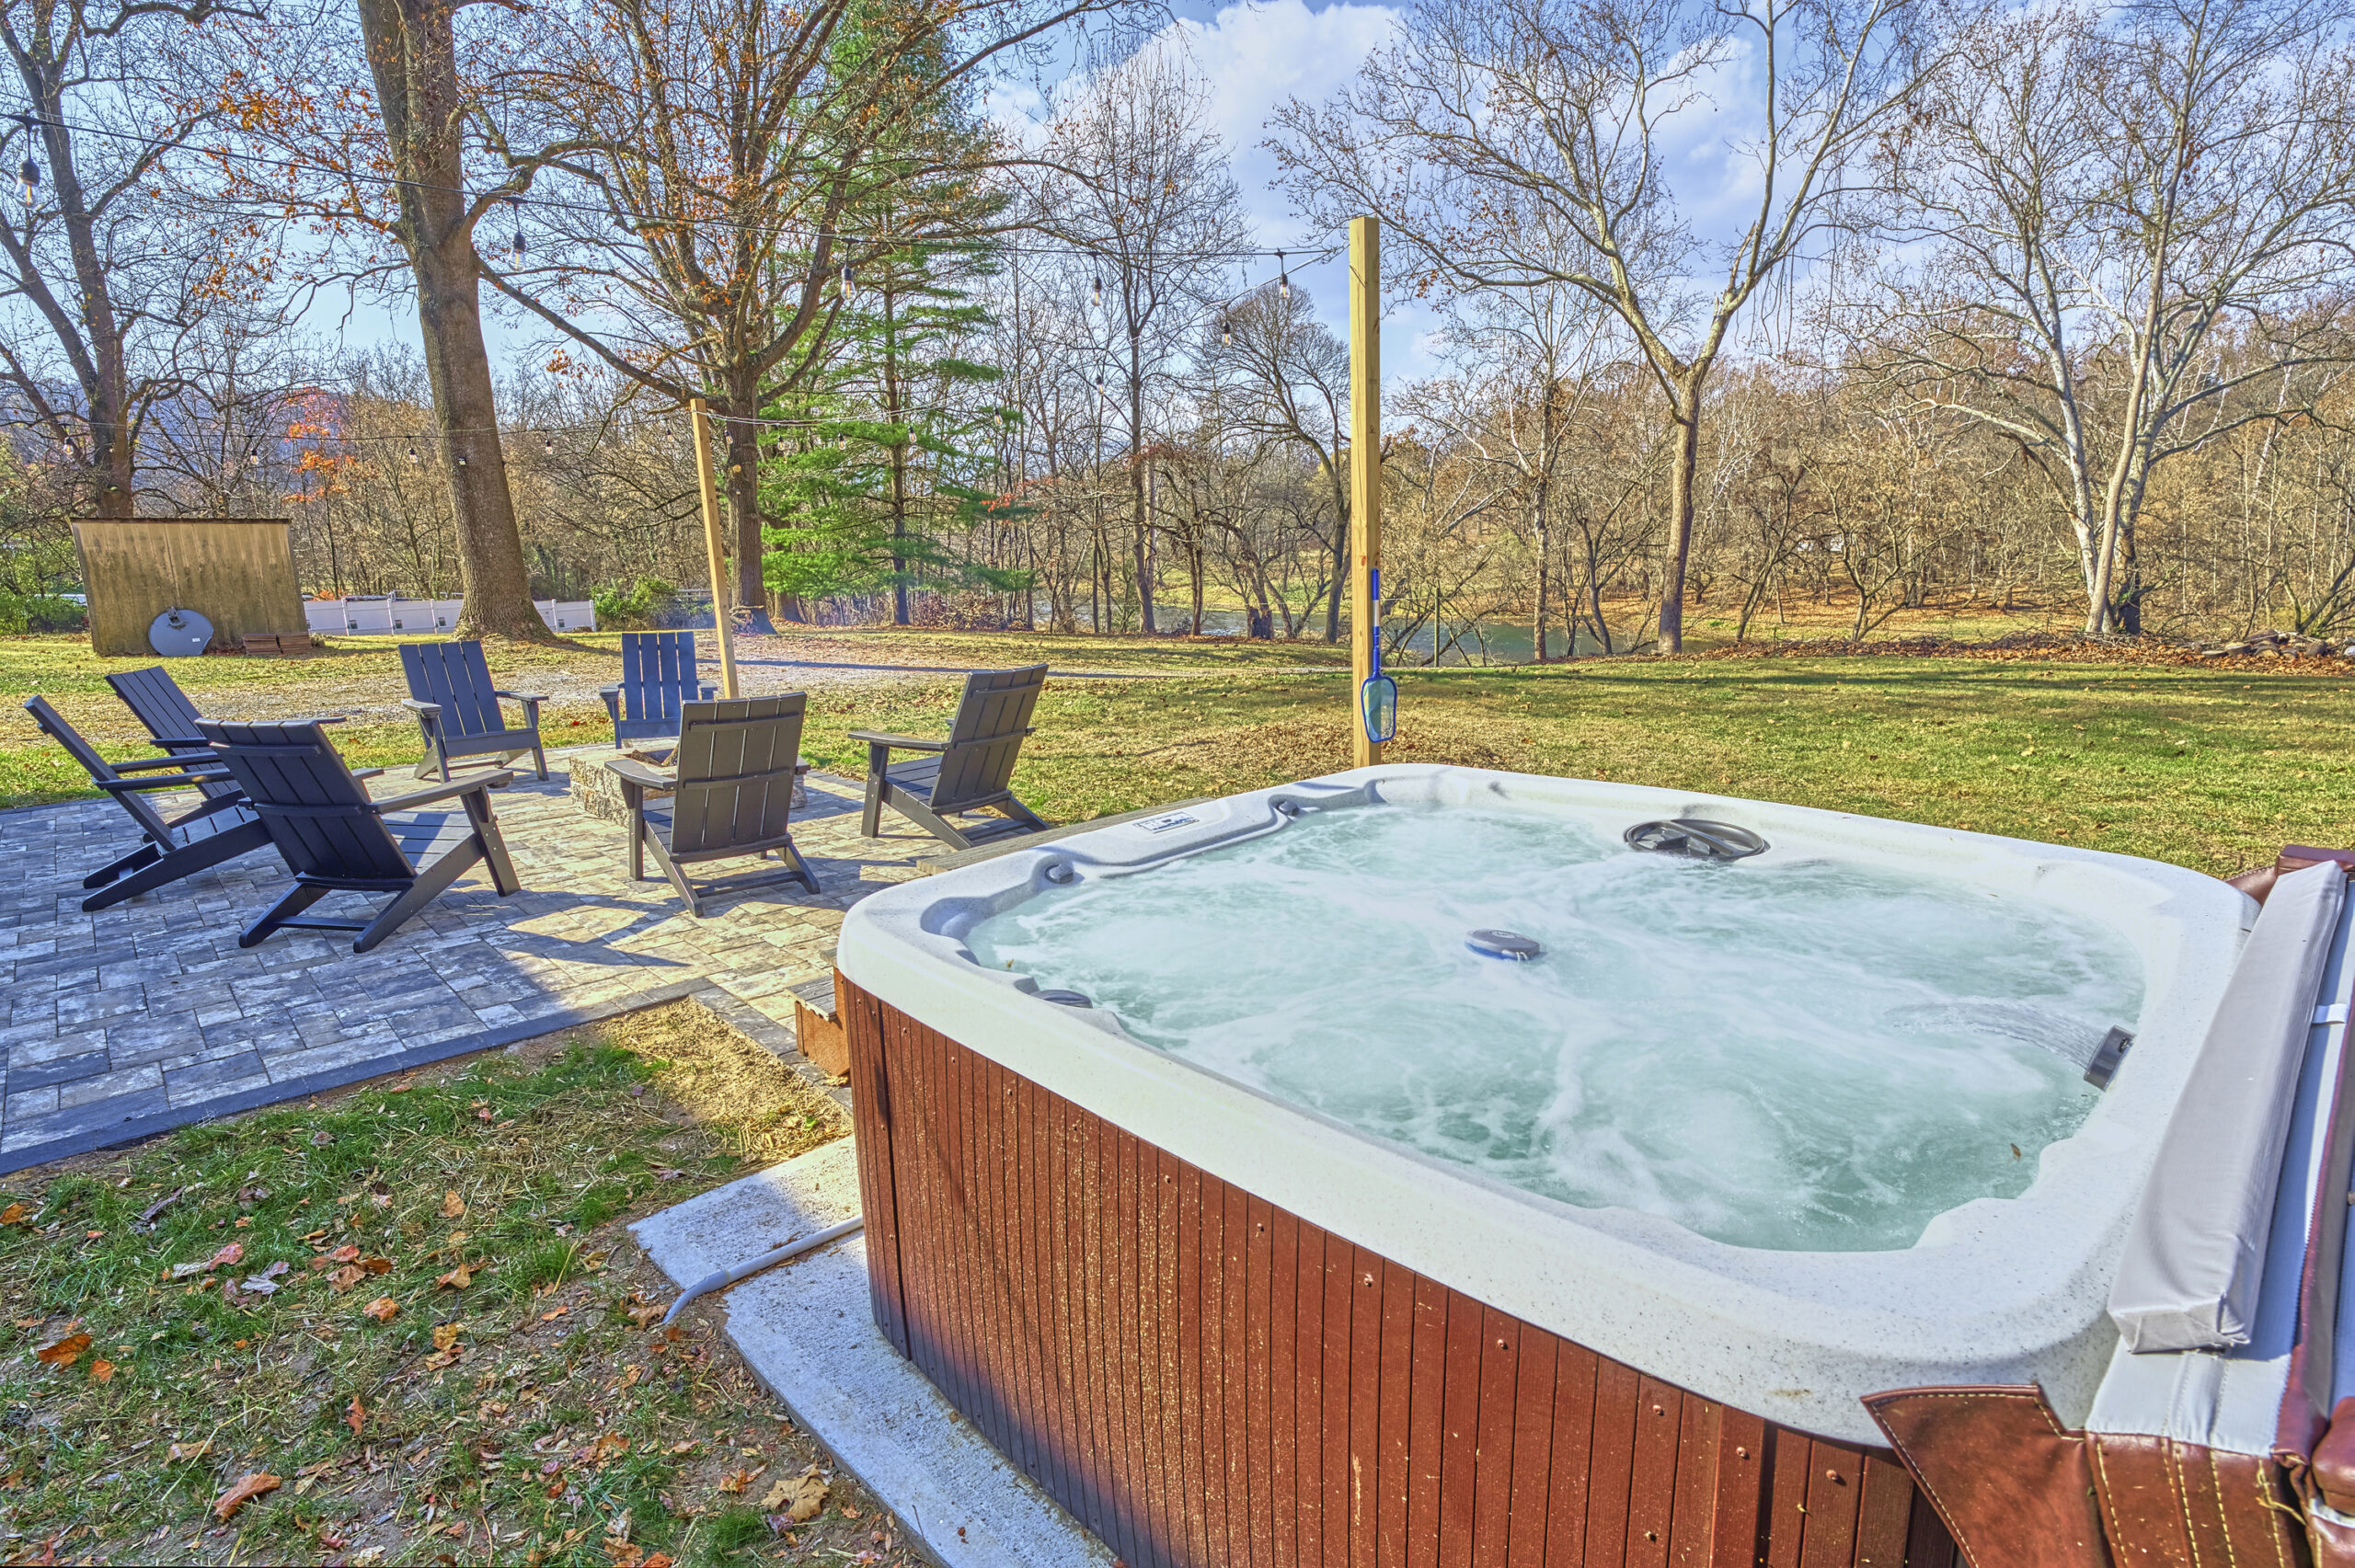 Professional exterior photo of 4809 Grove Hill River Rd - showing the hot tub in the foreground and the stone patio with fire pit in the background in the front yard